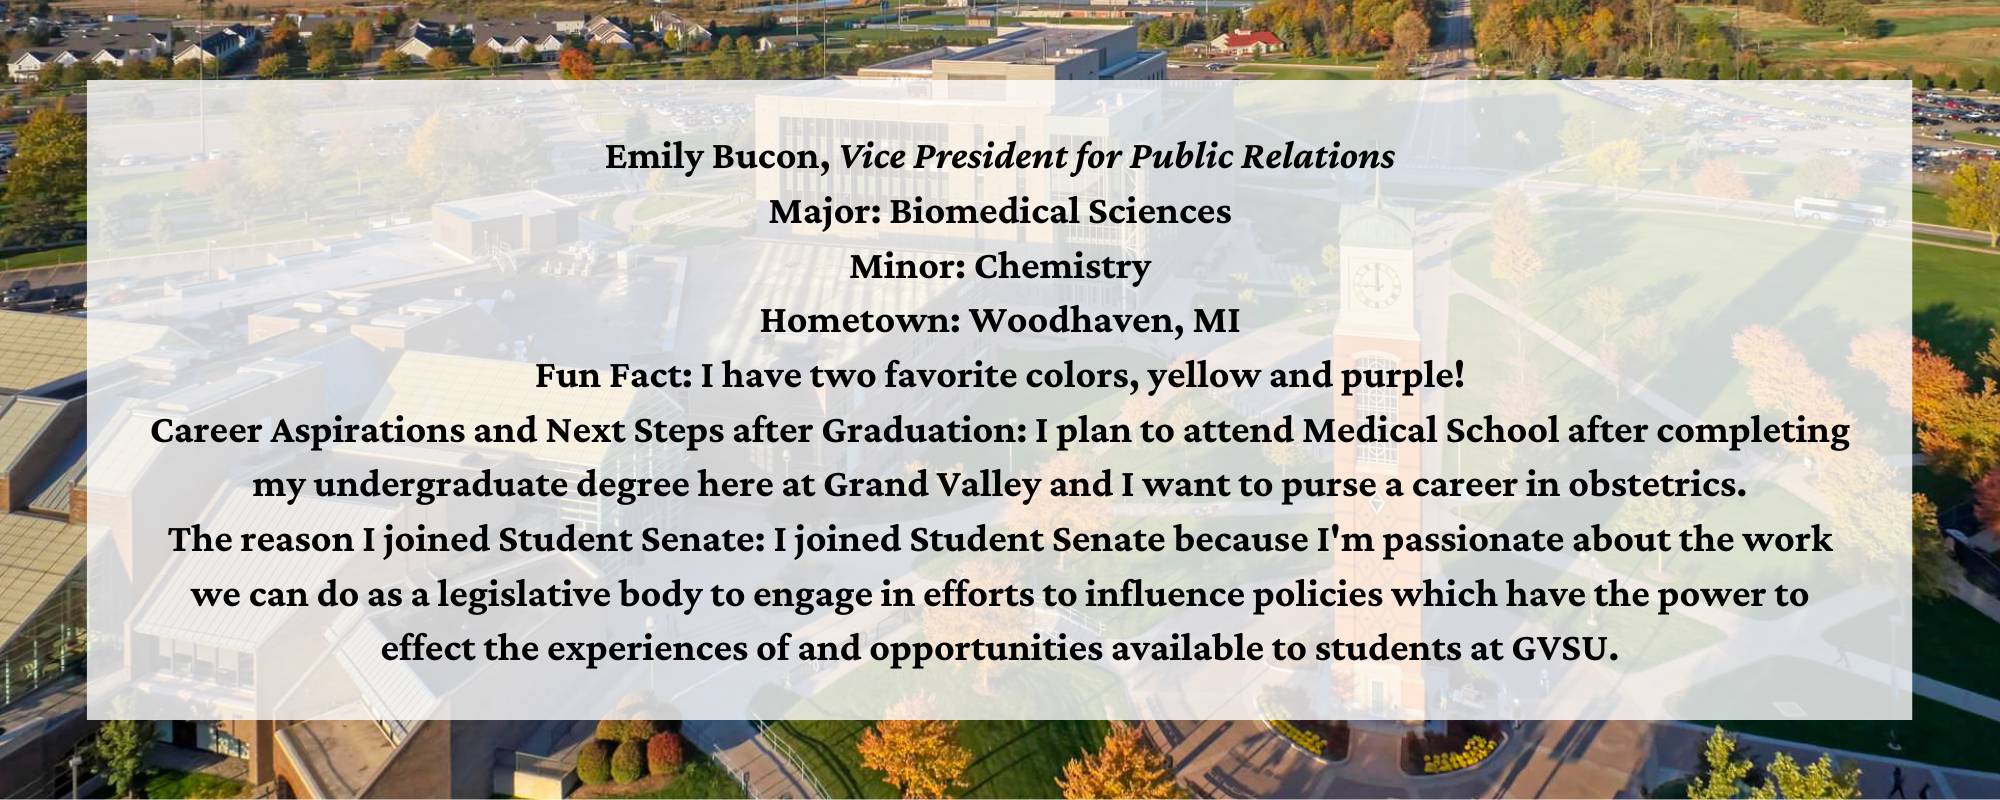 Emily Bucon, Vice President for Public Relations Major: Biomedical Sciences Minor: Chemistry Hometown: Woodhaven, MI Fun Fact: I have two favorite colors, yellow and purple! Career Aspirations and Next Steps after Graduation: I plan to attend Medical School after completing my undergraduate degree here at Grand Valley and I want to purse a career in obstetrics. The reason I joined Student Senate: I joined Student Senate because I'm passionate about the work we can do as a legislative body to engage in efforts to influence policies which have the power to effect the experiences of and opportunities available to students at GVSU.